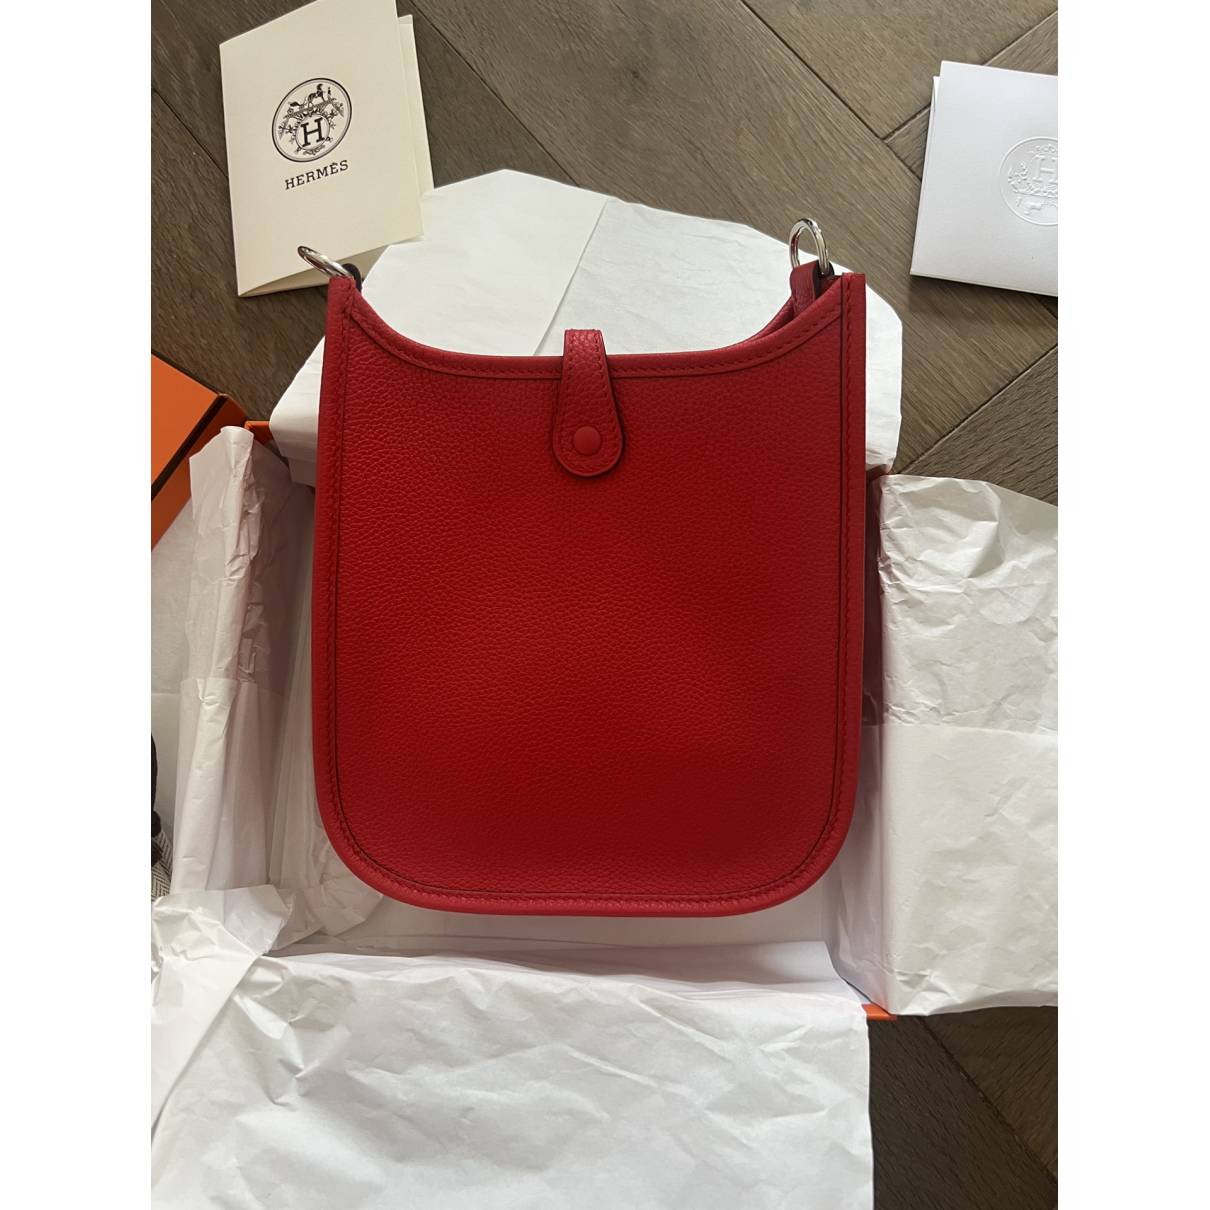 Hermès - Authenticated Mini Evelyne Handbag - Leather Red Plain For Woman, Never Worn